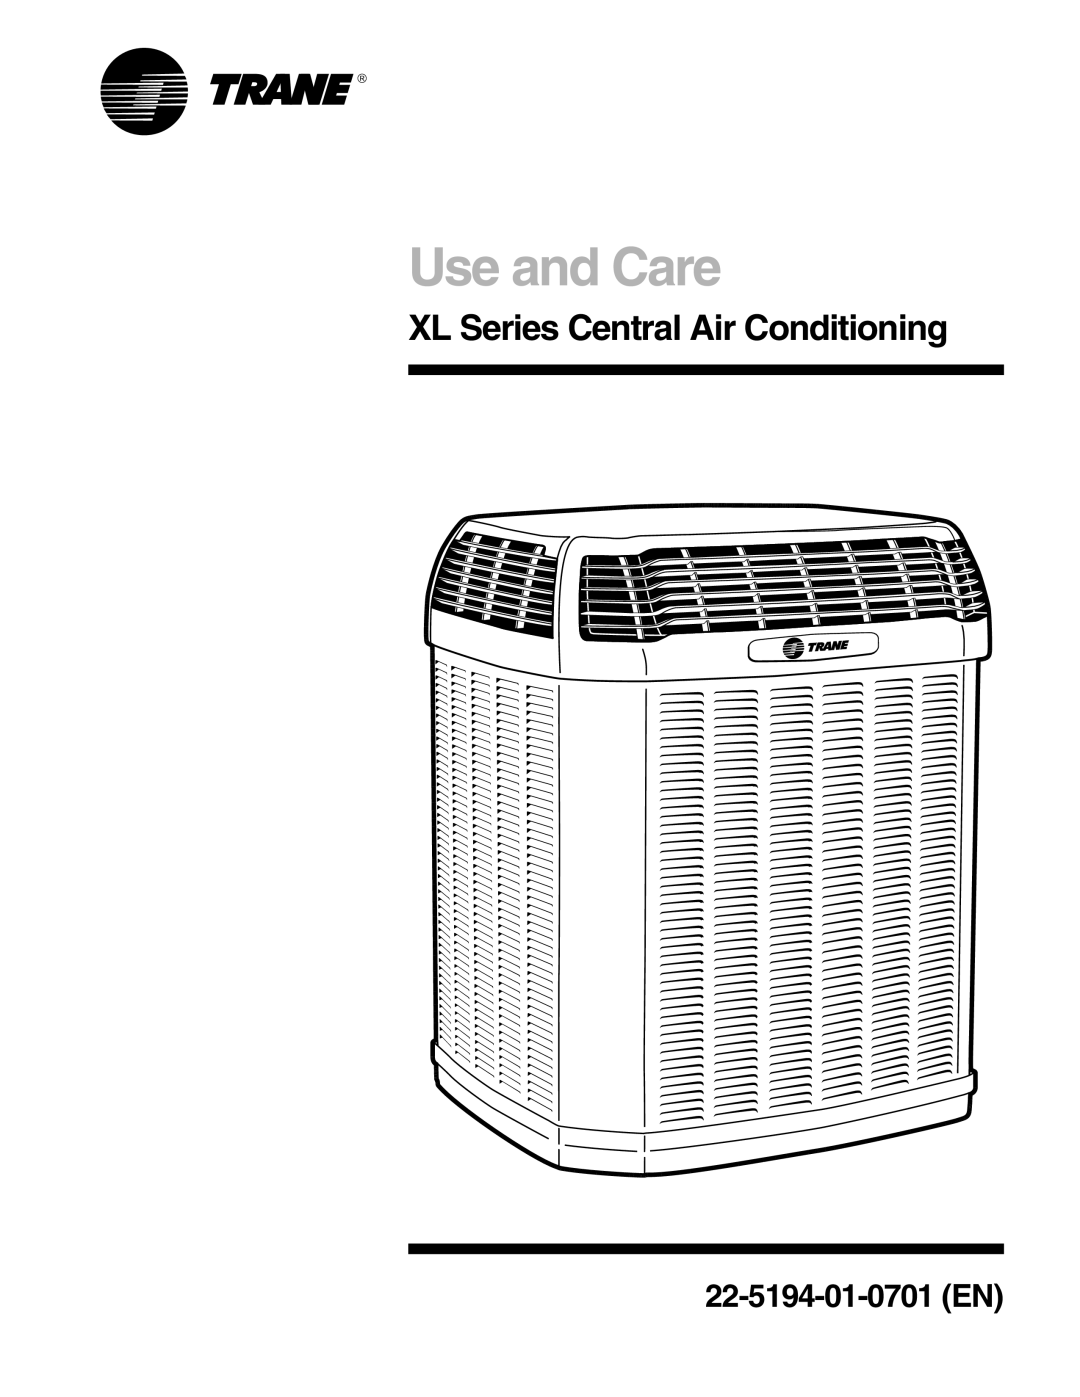 Trane manual XL Series Central Air Conditioning, Use and Care, 22-5194-01-0701EN 